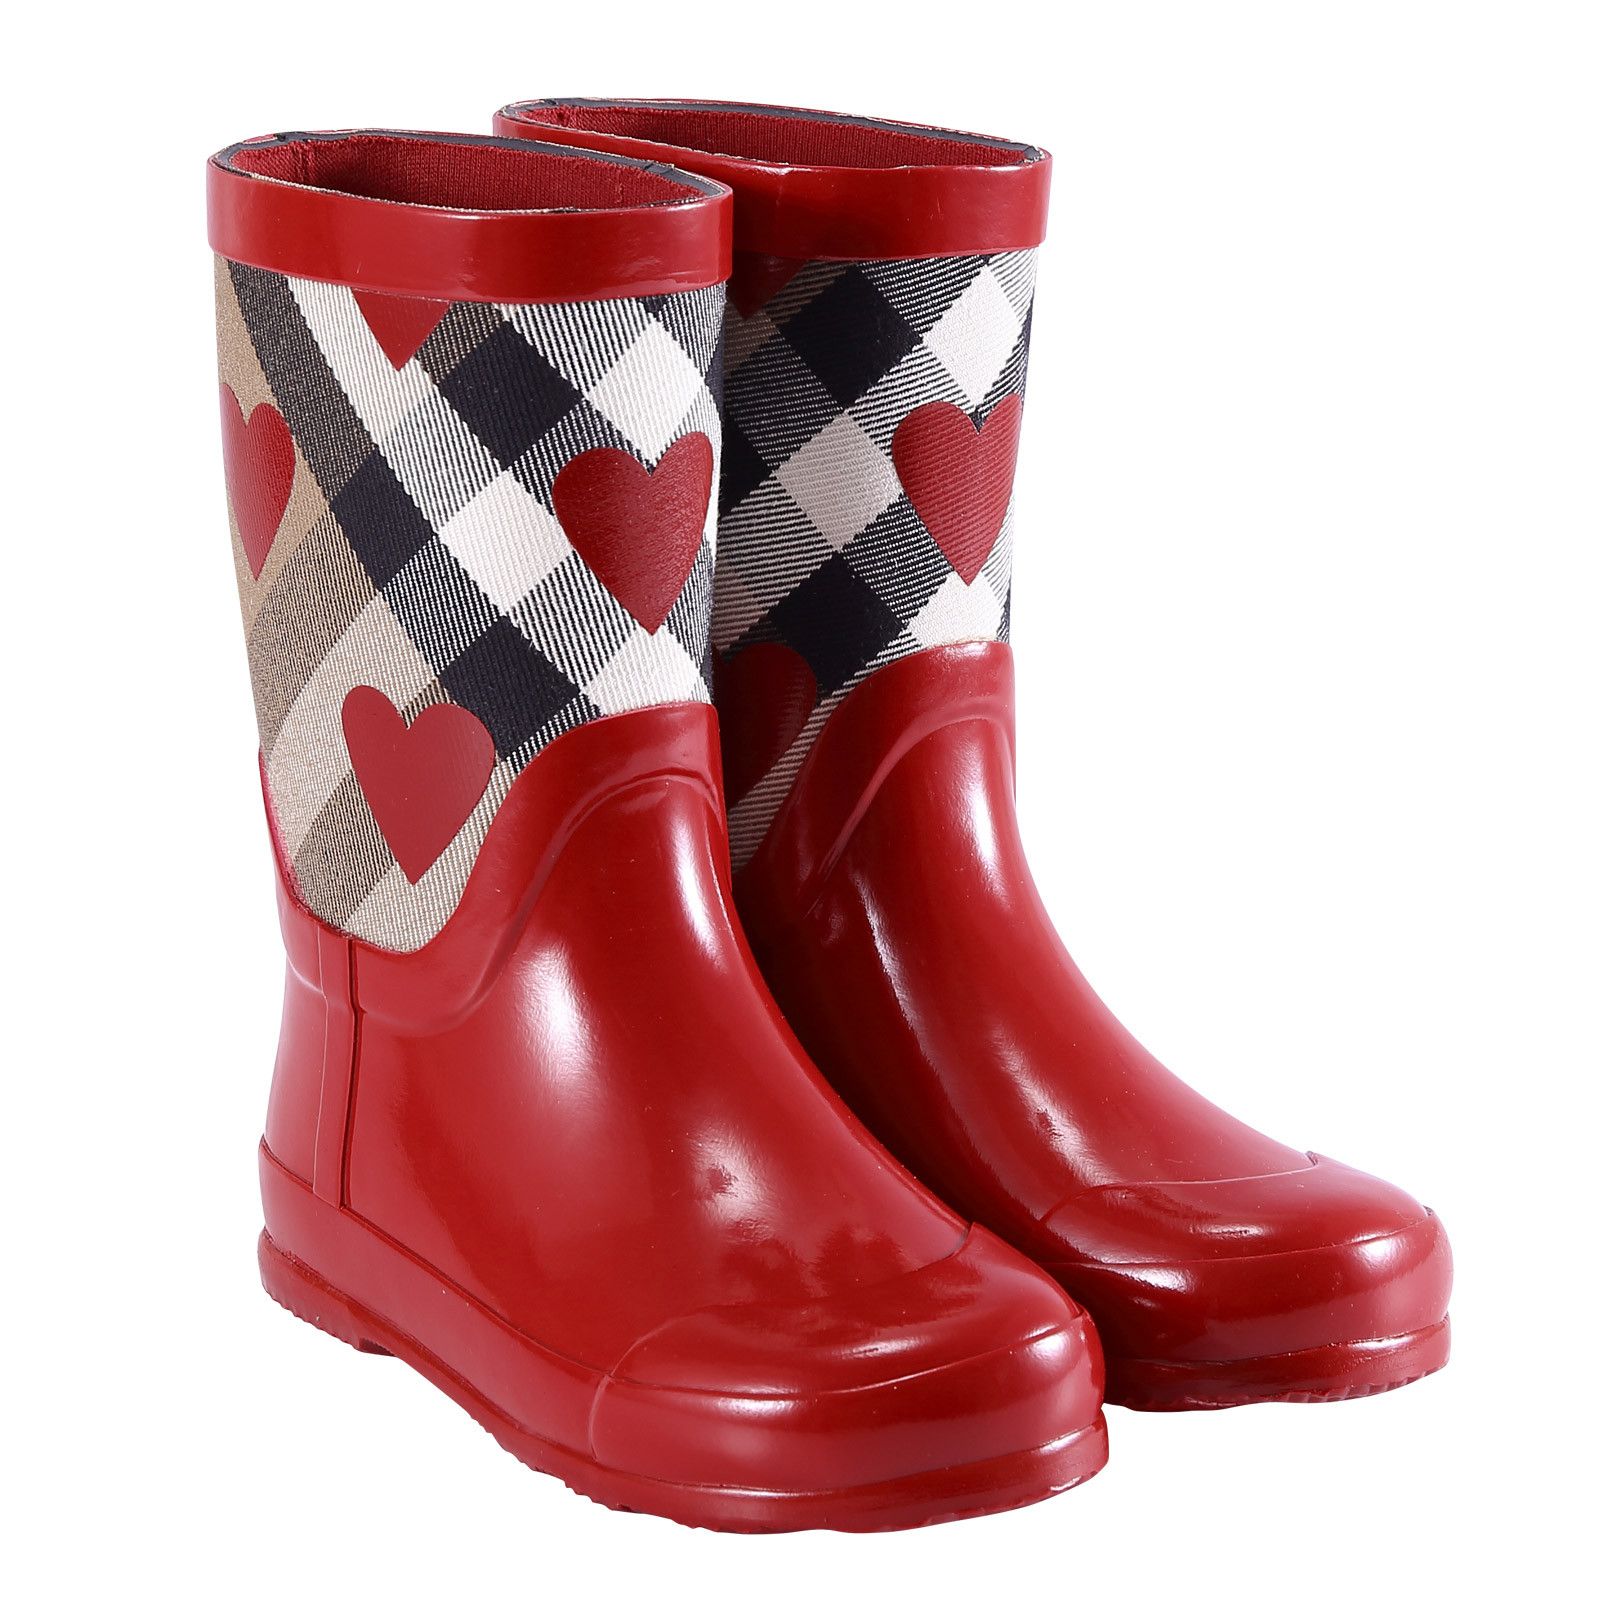 Baby Girls Red Rain Boots With House Check & Hearts - CÉMAROSE | Children's Fashion Store - 1